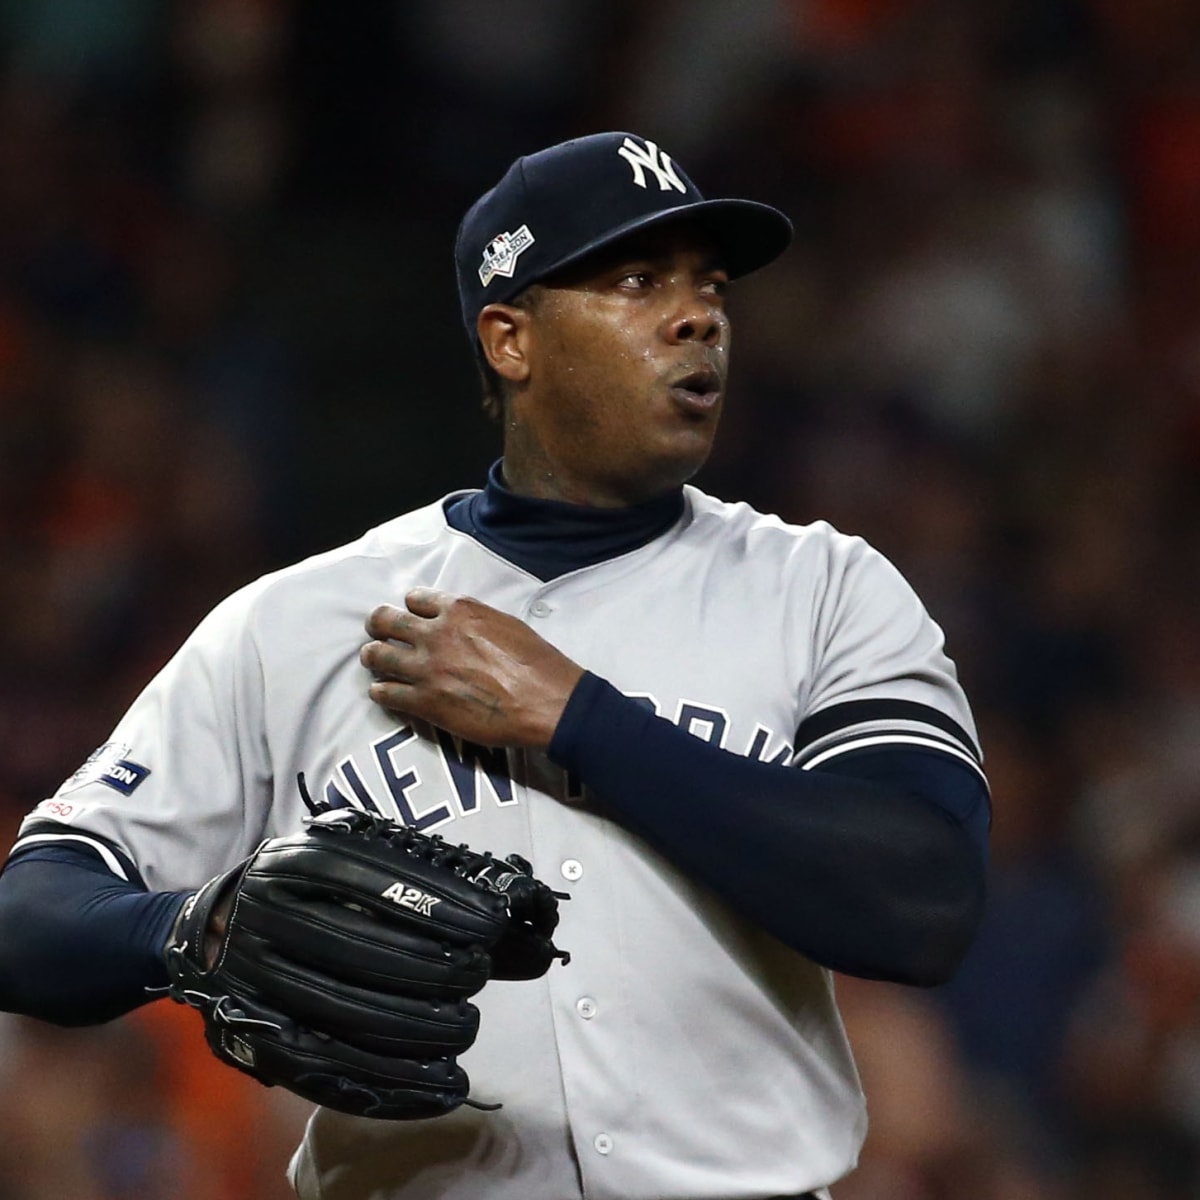 New York Yankees relief pitcher Aroldis Chapman celebrates after the final  out in the 9th inning in game 3 against the Cleveland Indians in the 2017  MLB Playoffs American League Divisional Series